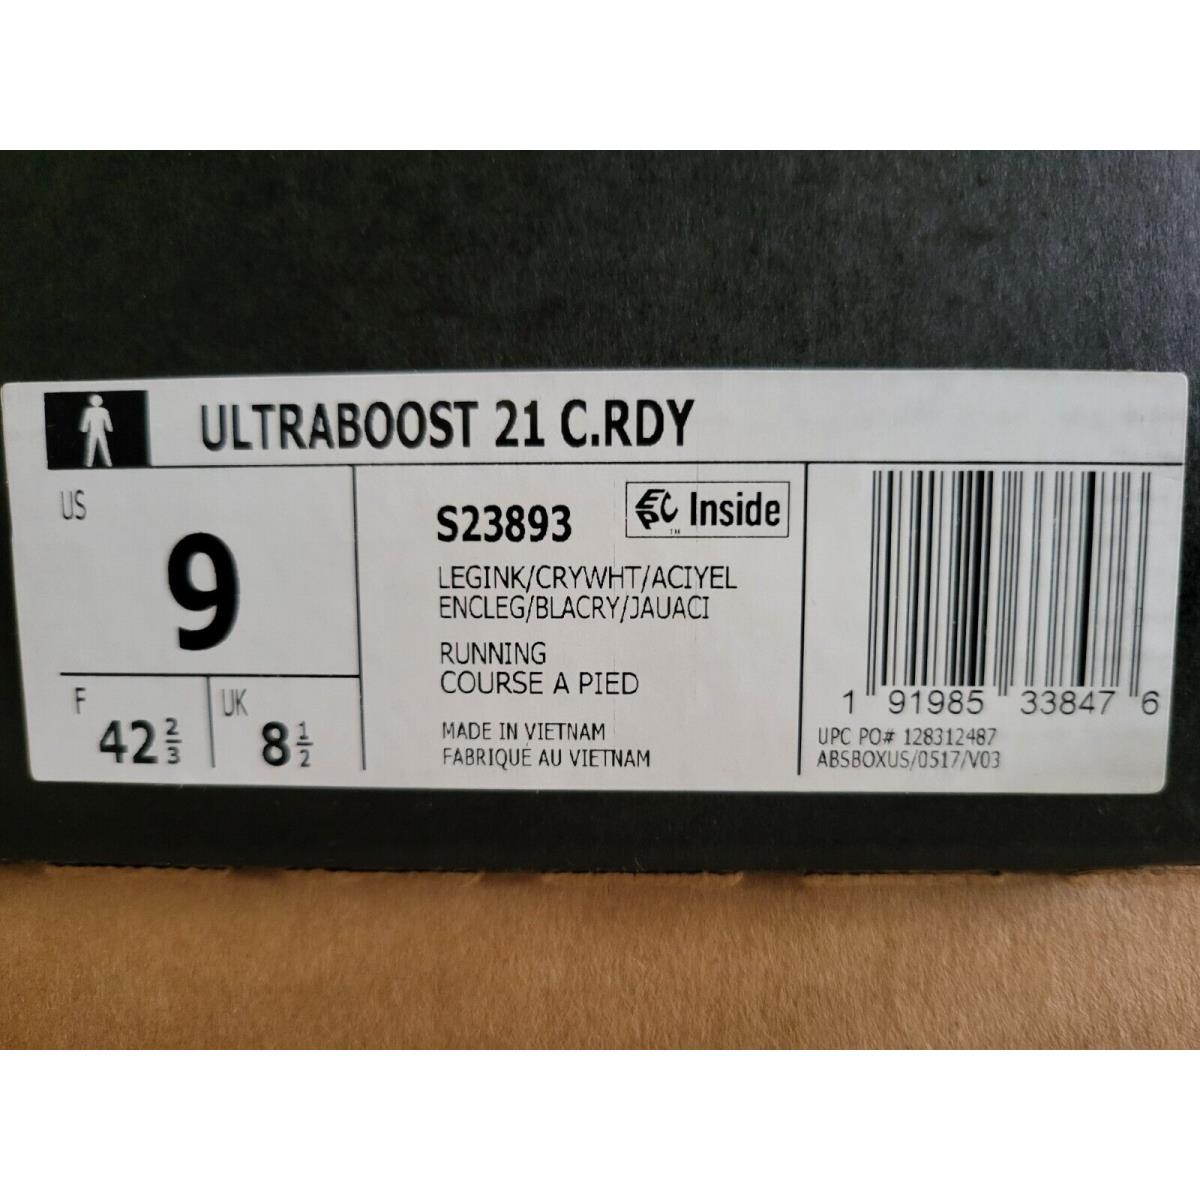 Couscous Inactive be impressed Adidas Ultraboost 21 Cold.rdy Men s Running Shoes Legend Ink S23893 US 9 UK  8.5 | 692740714233 - Adidas shoes Ultraboost - Legend Ink | SporTipTop